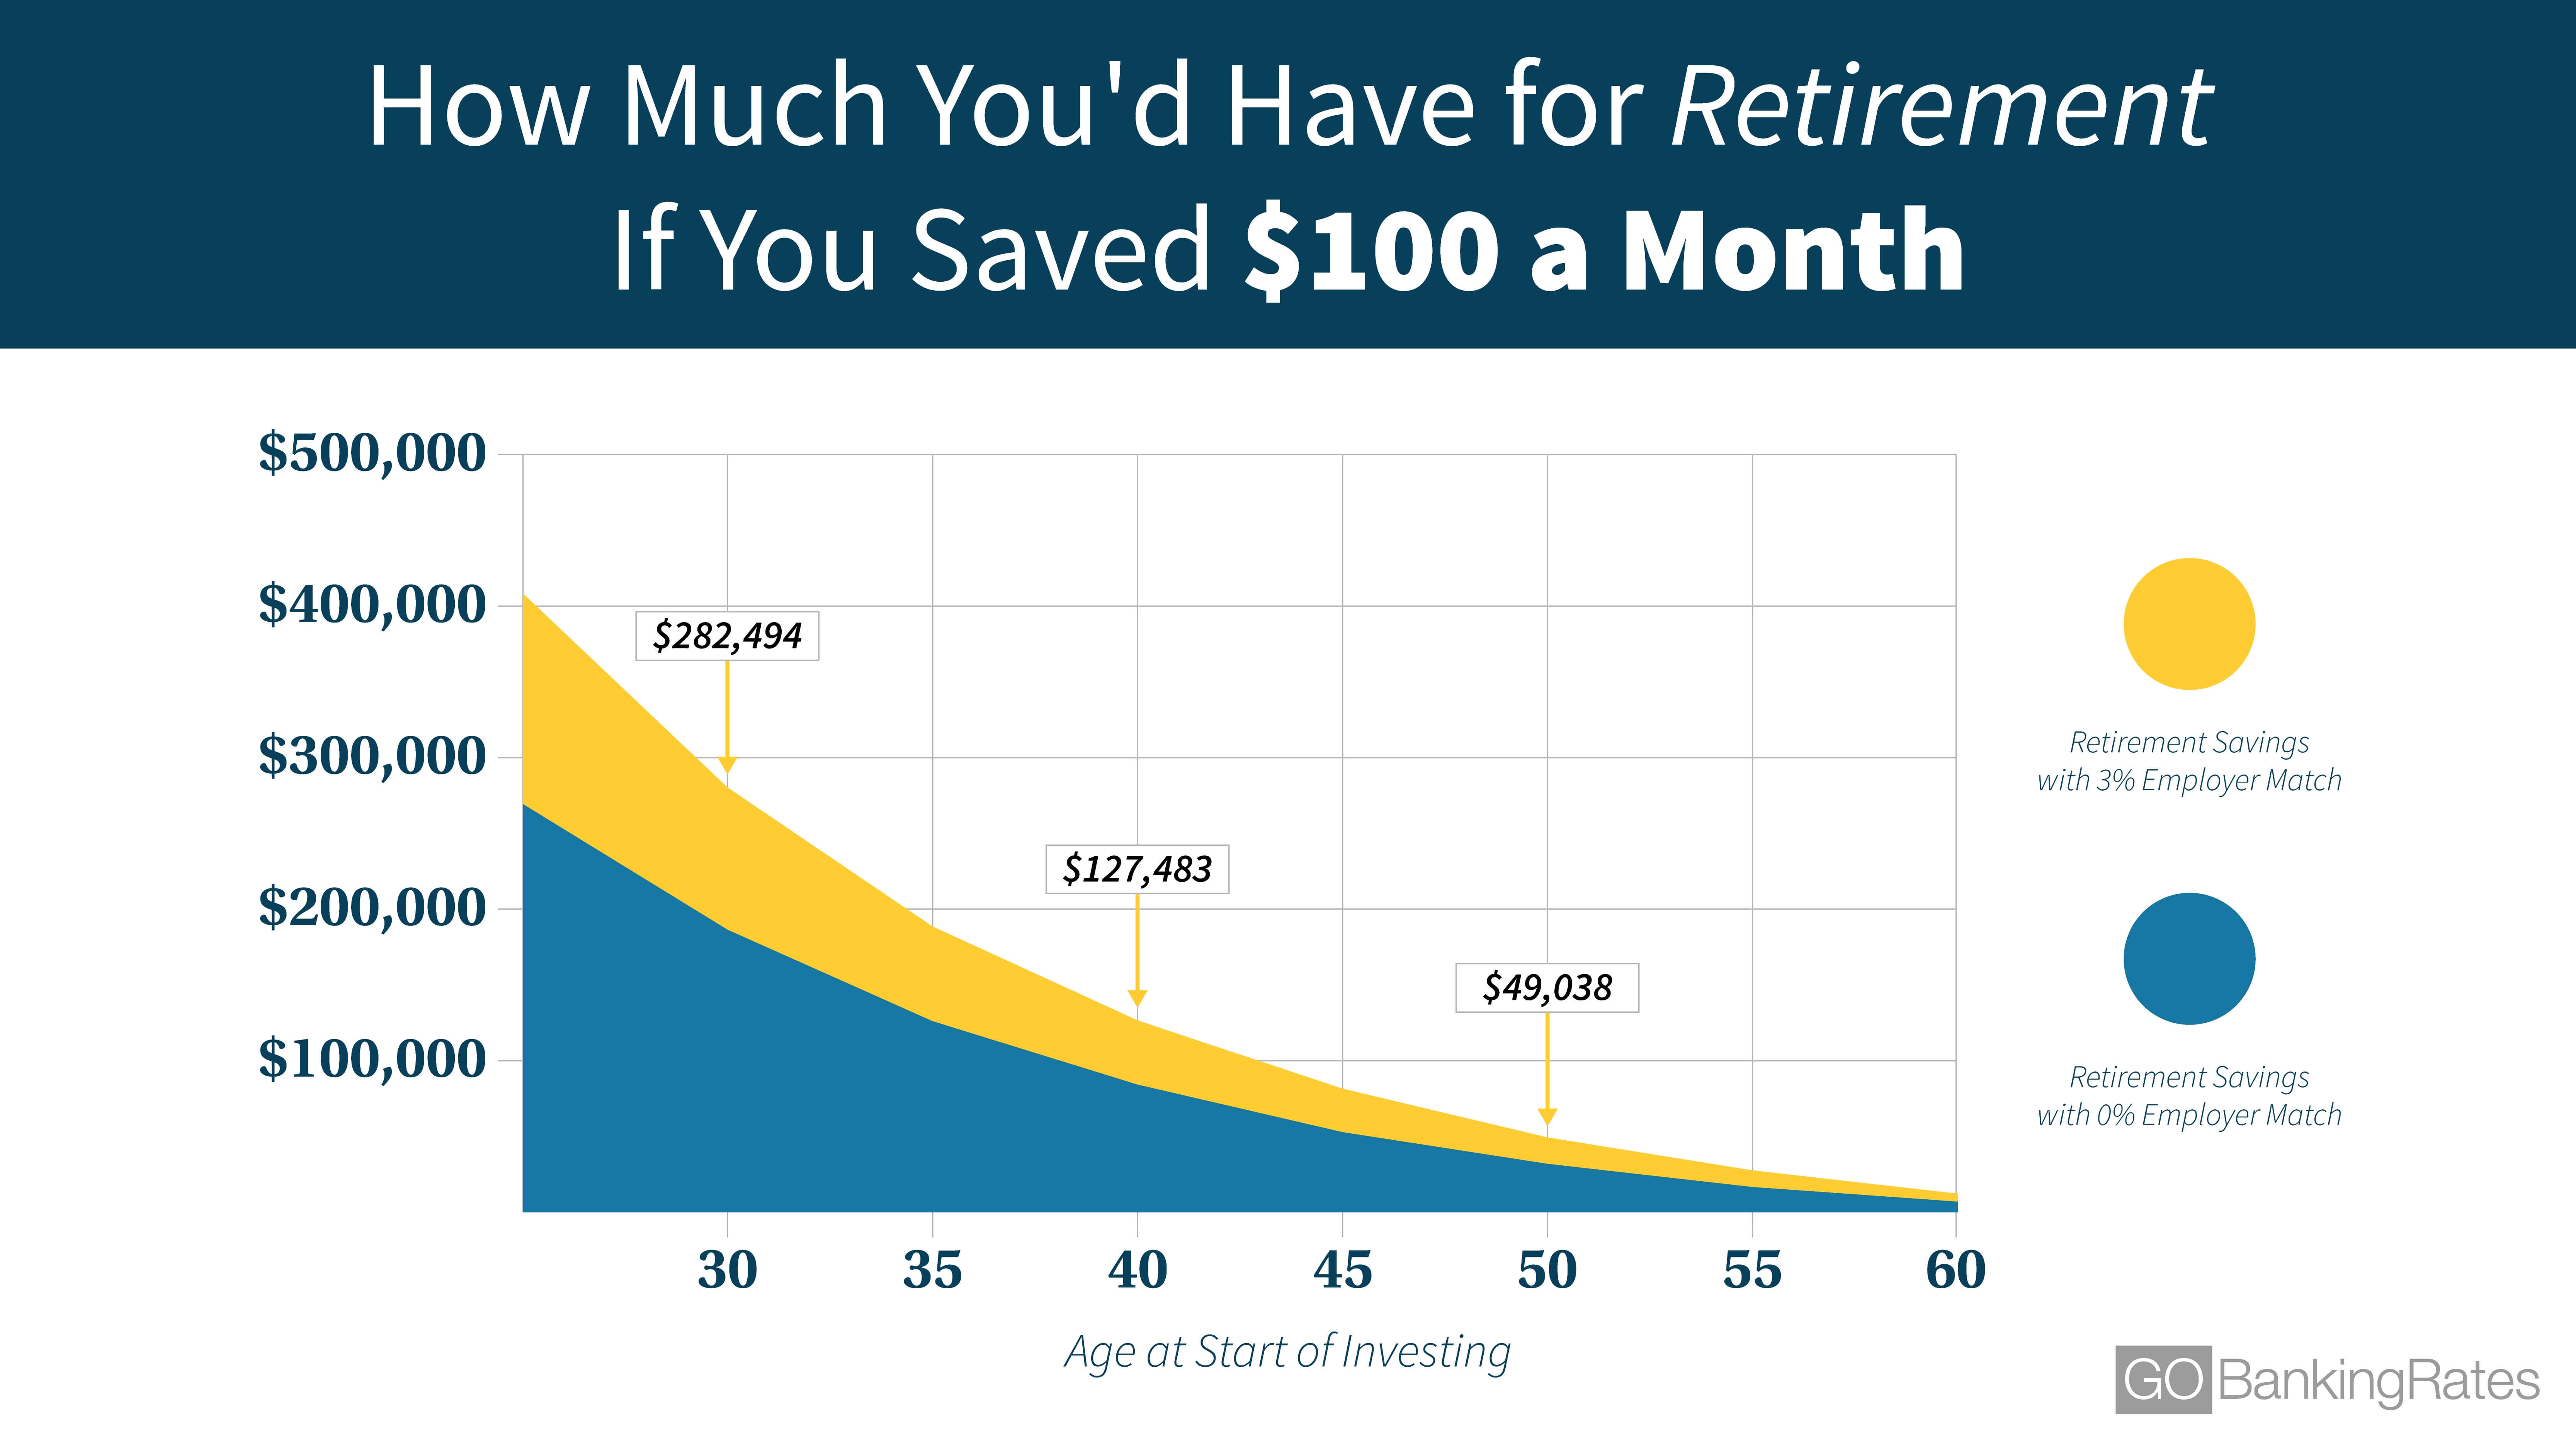 Can You Retire by Saving One Hundred Dollars a Month? GOBankingRates